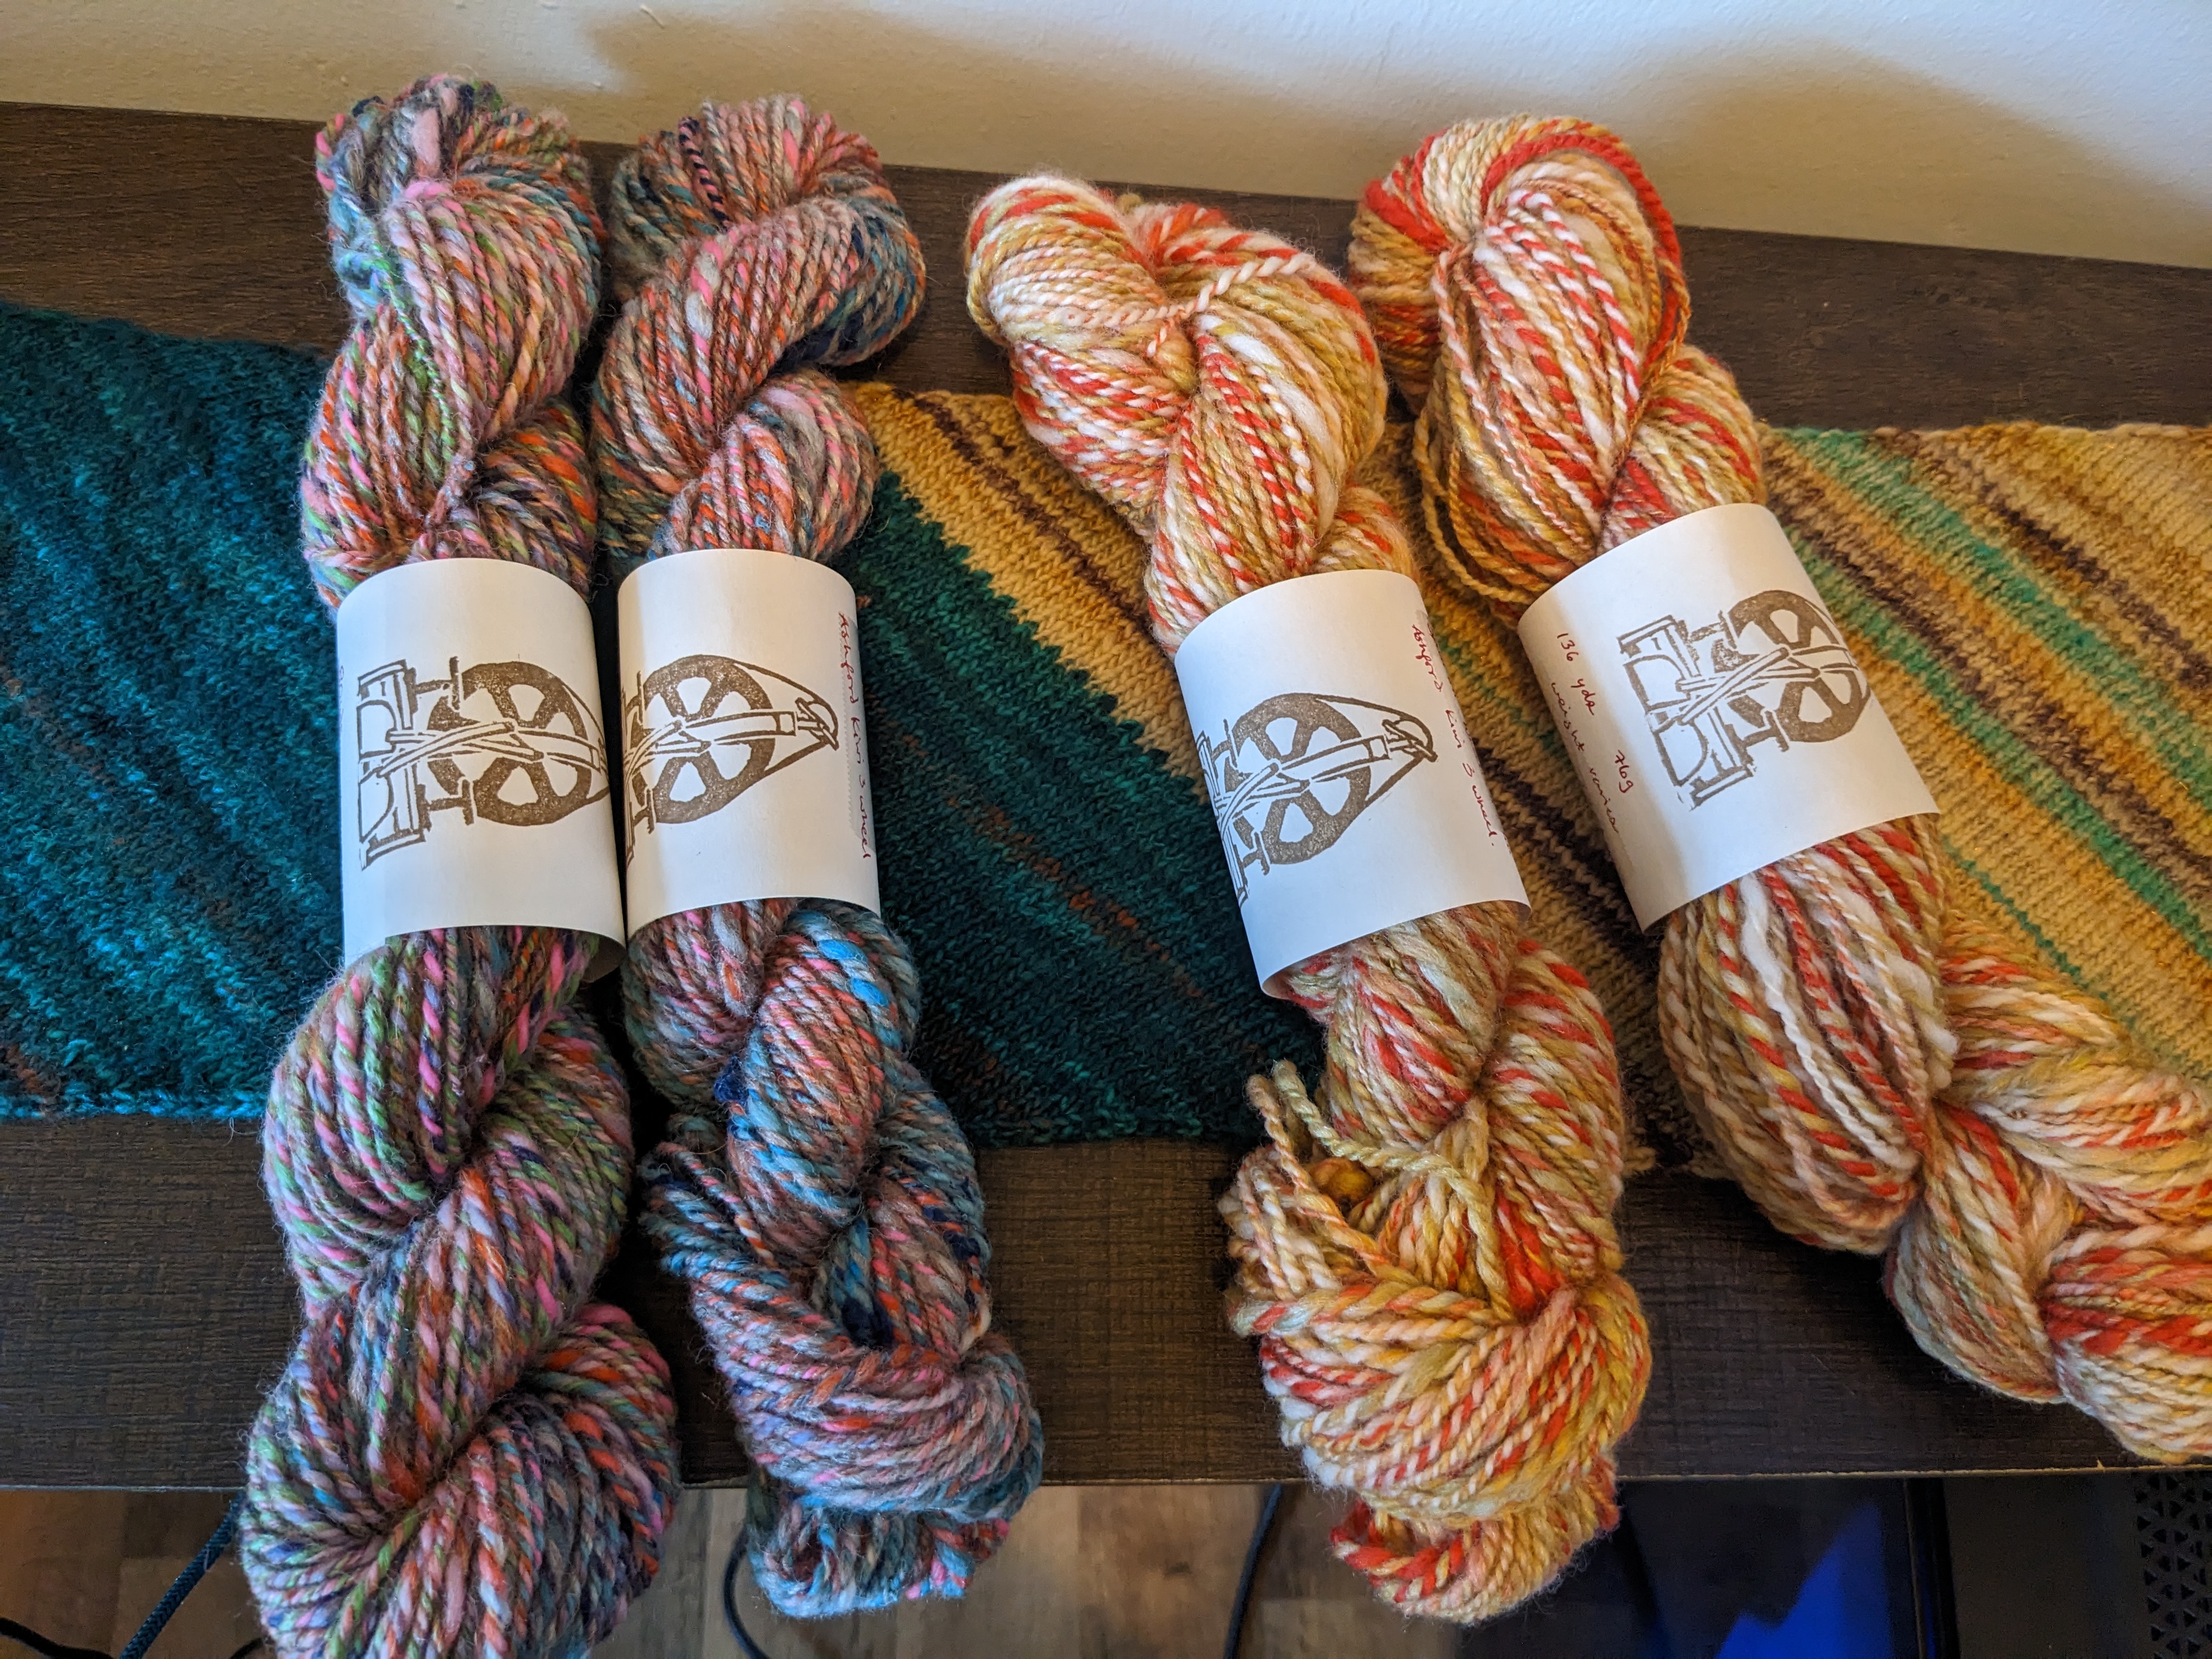 4 skeins of handspun yarn, two in a somewhat pastel multicolor and two in a blend of orange, gold, and white.